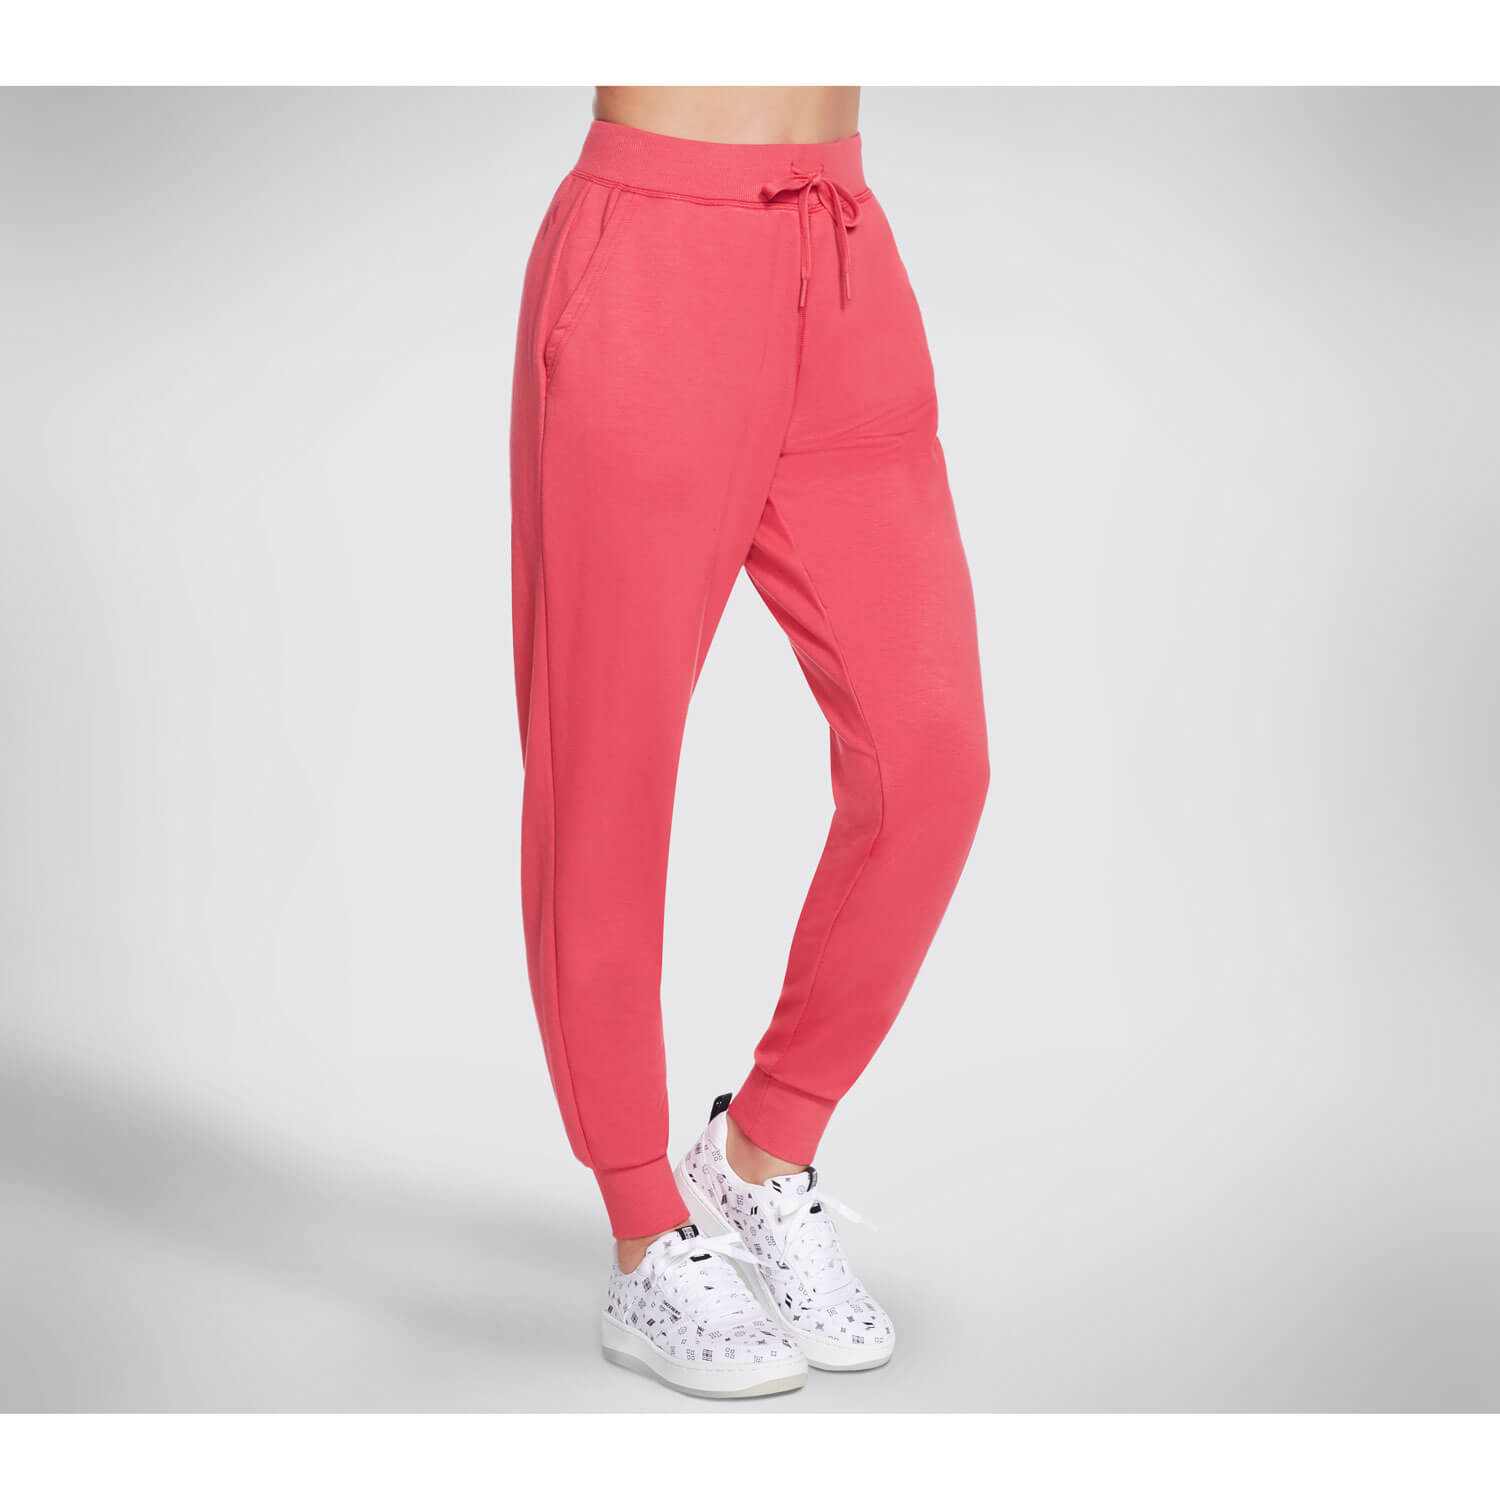 Skechers Apparel Skechluxe Restful Jogger Pant - Wine 3 Shaws Department Stores